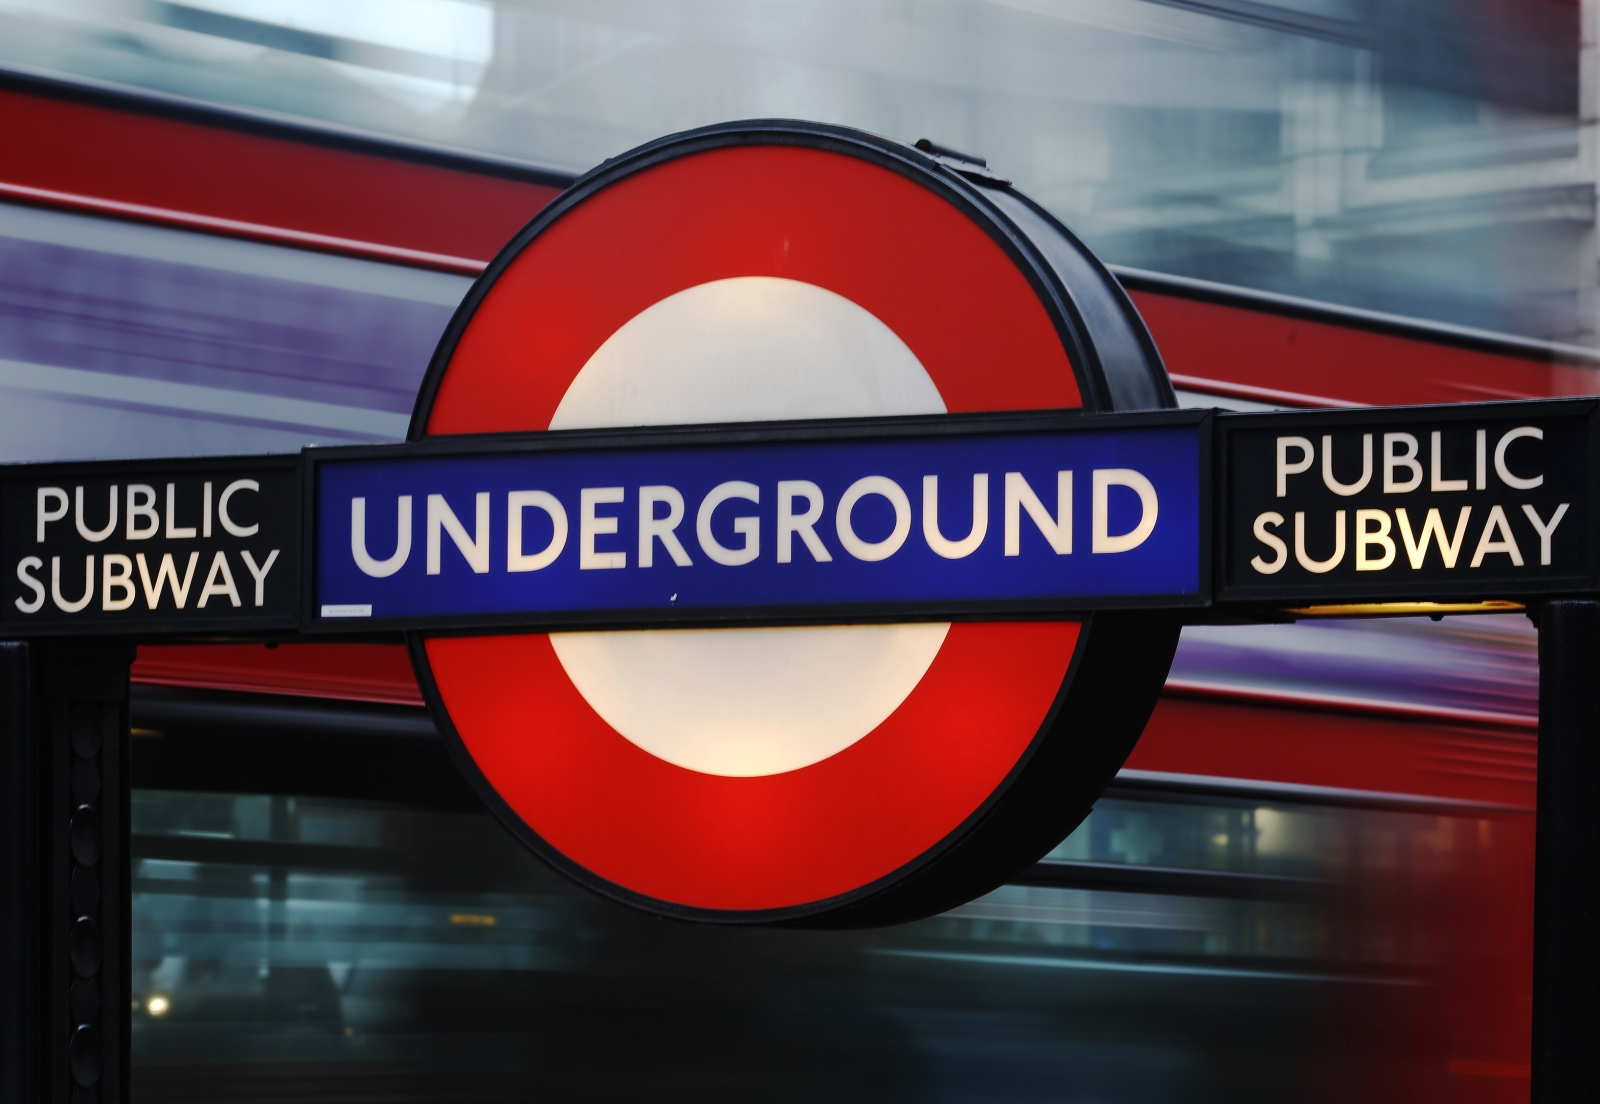 Ghost Tube stations: Meet the man bringing London's abandoned underground back to life